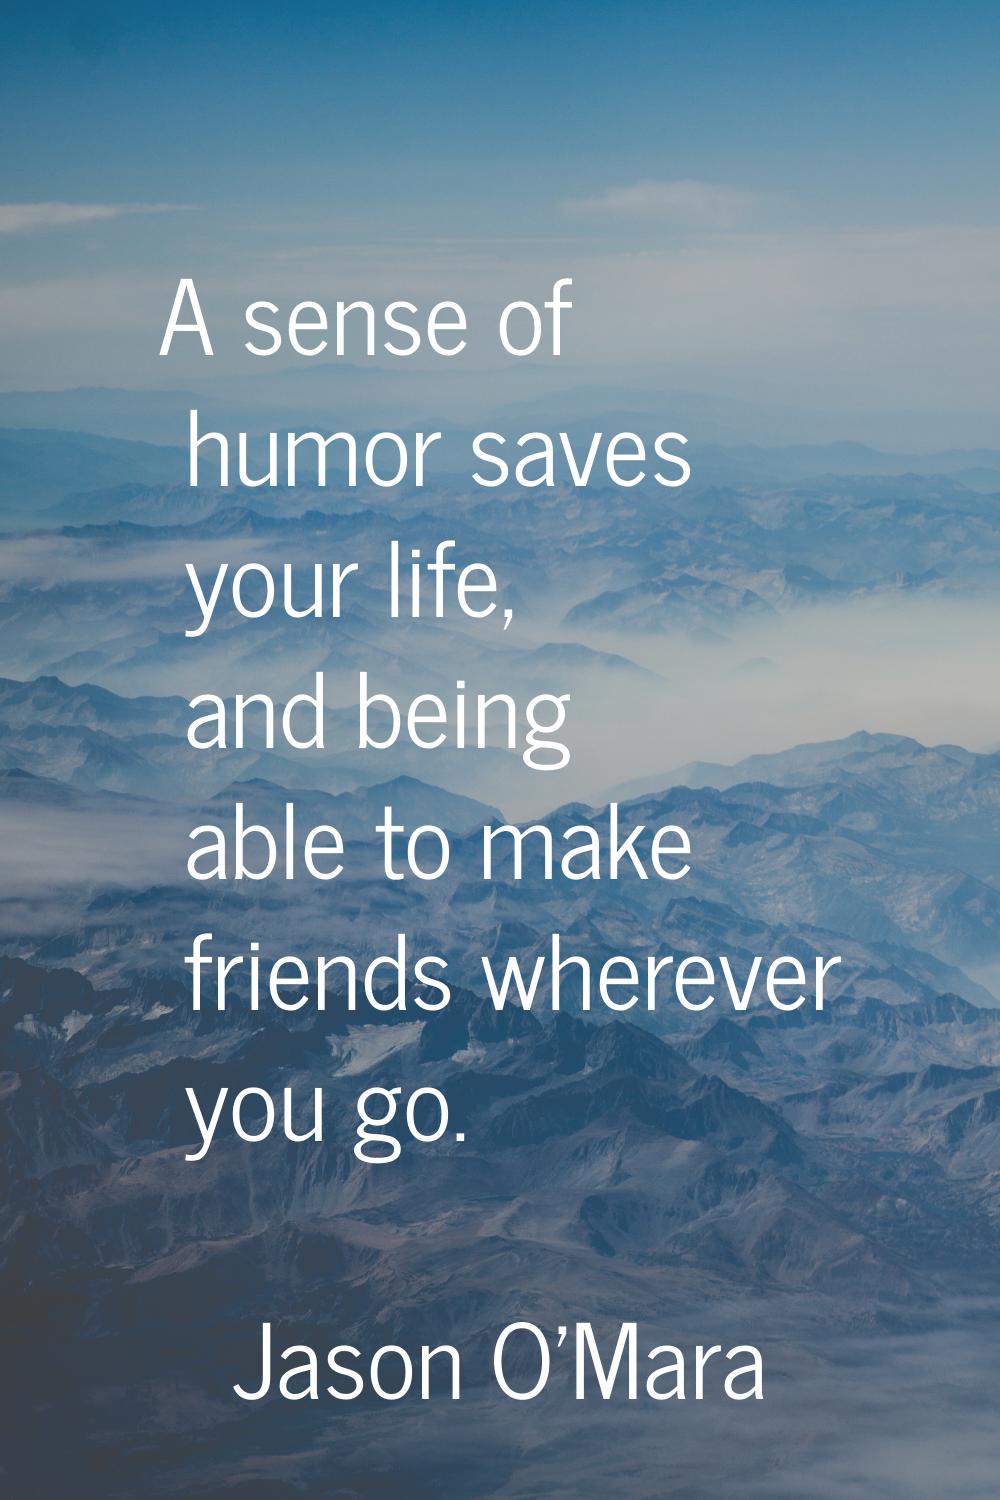 A sense of humor saves your life, and being able to make friends wherever you go.